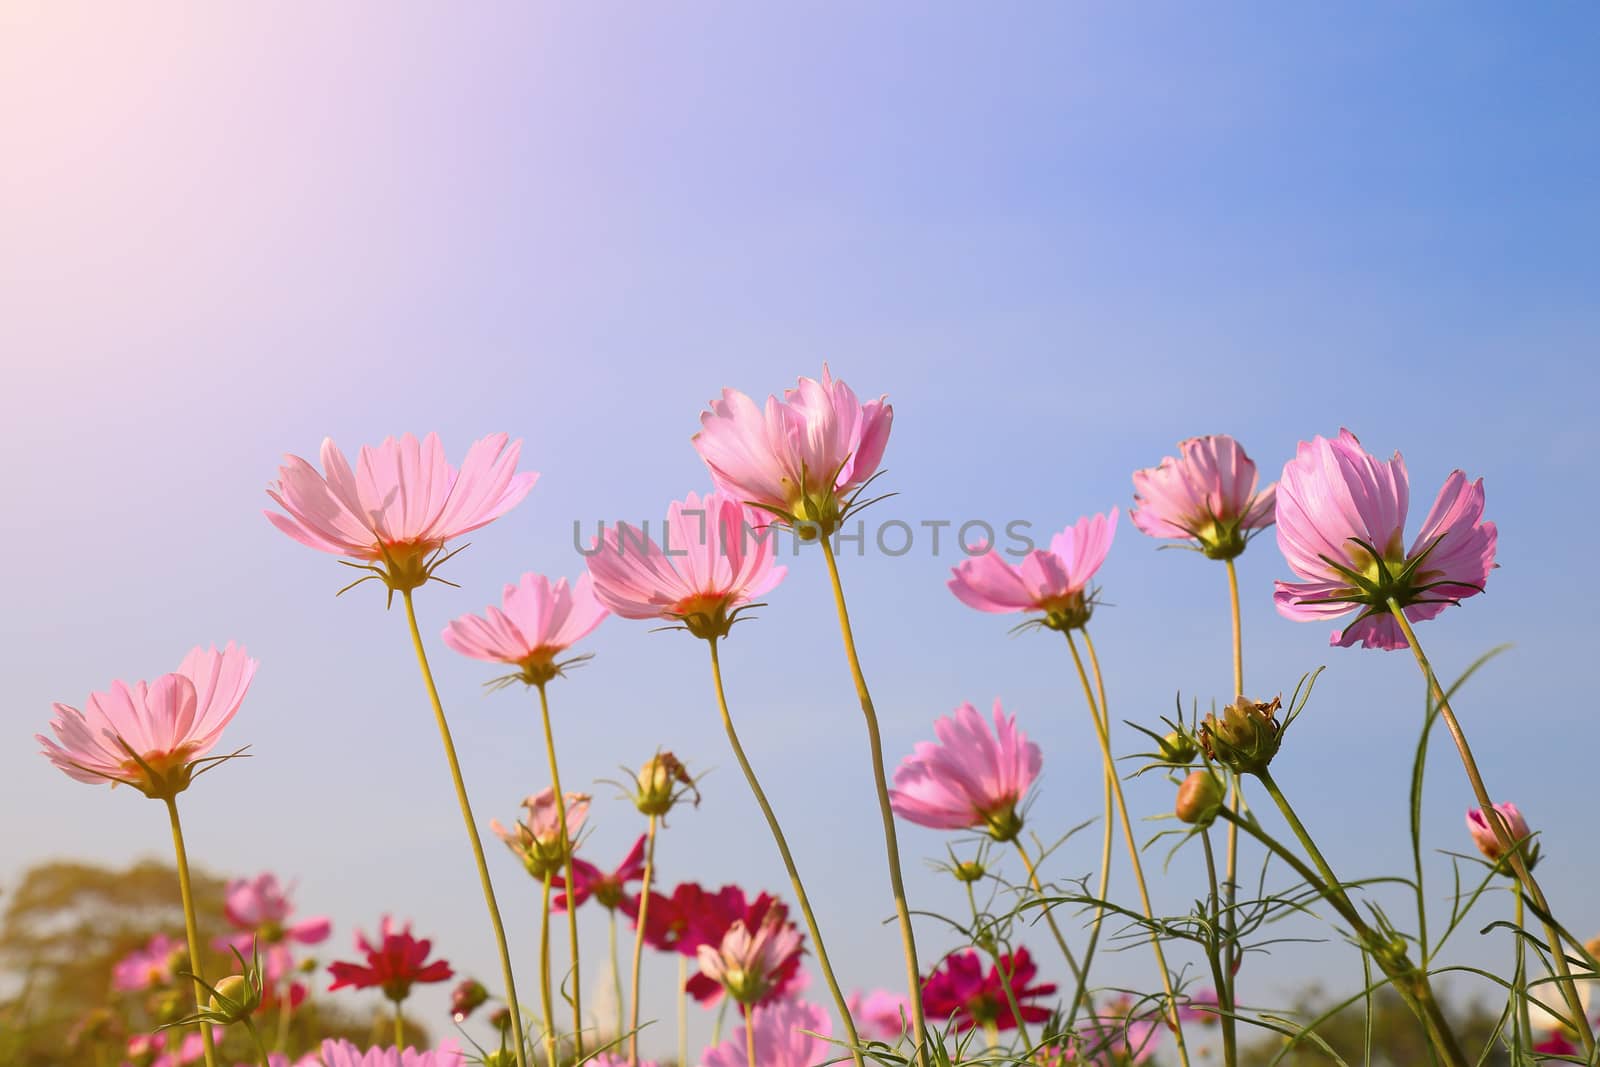 Pink cosmos flowers in the field with morning ray light.